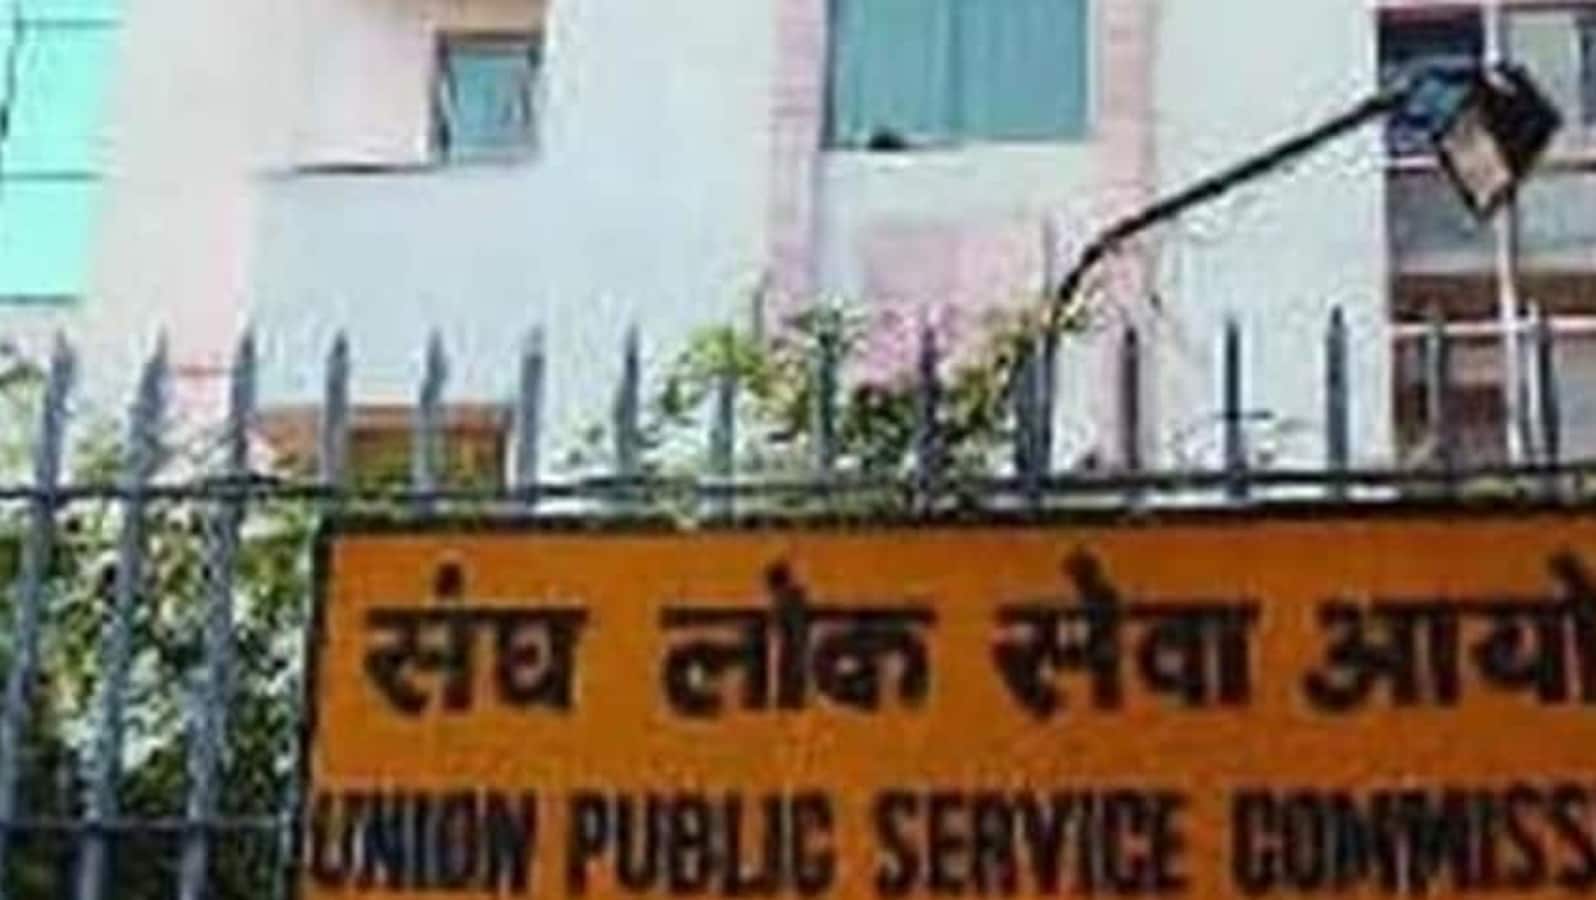 UPSC ESE Admit Card 2021 for main exam released, here’s direct link to download